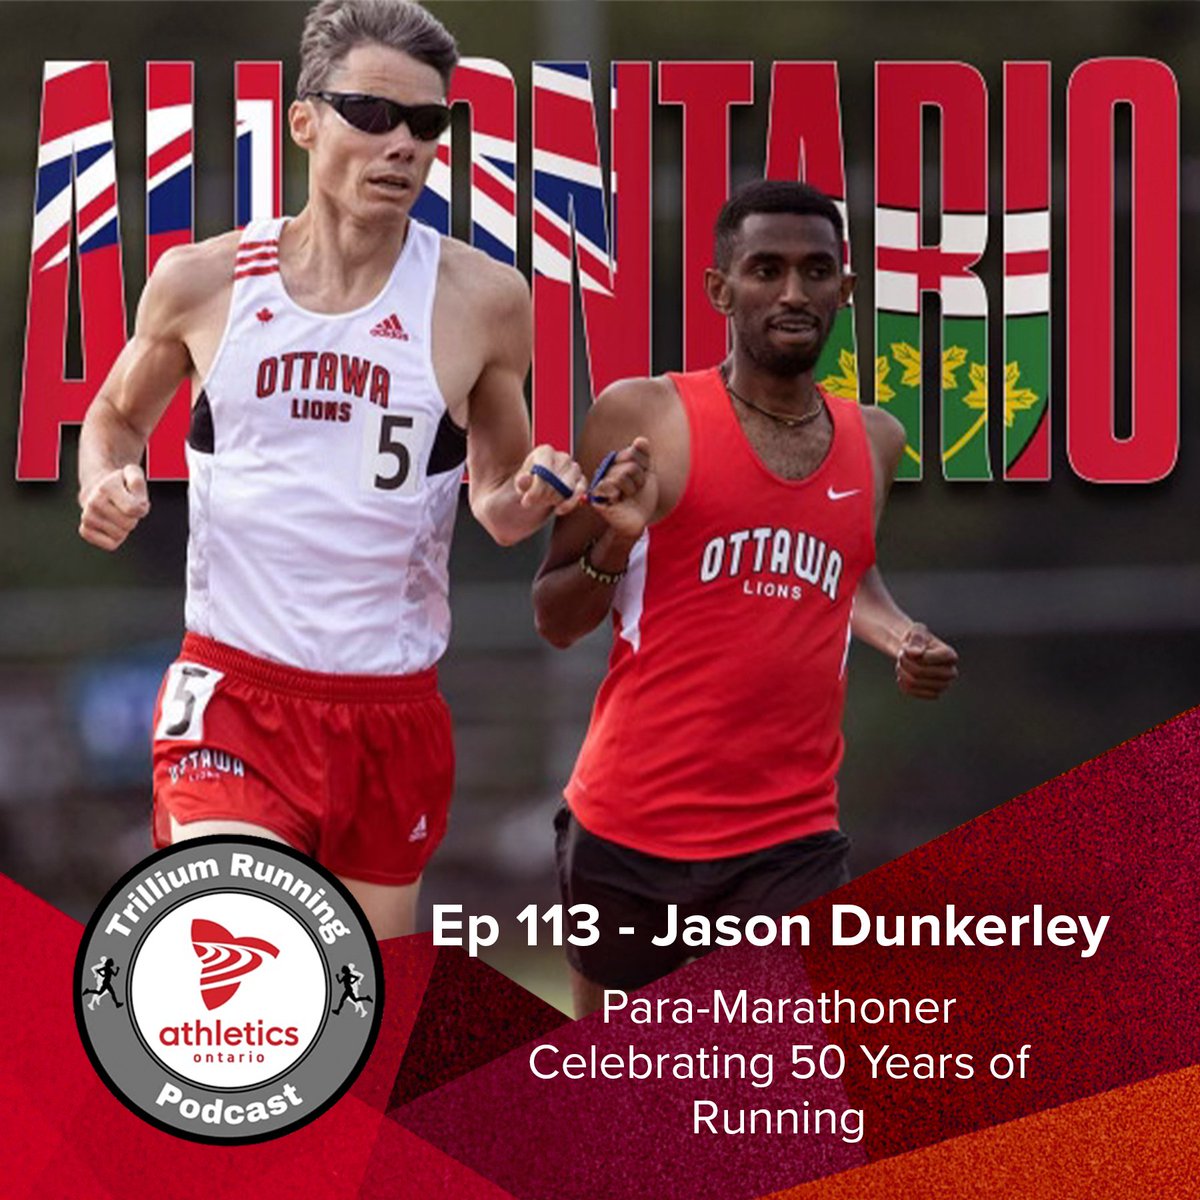 .@athleticsont's next episode of the Trilium Running Podcast, host John Shep and Canadian Paralympic legend Jason Dunkerley, a visually impaired runner, share their connection to the history of Tamarack Ottawa Race weekend. Listen here: athleticsontario.ca/road-trail-run…